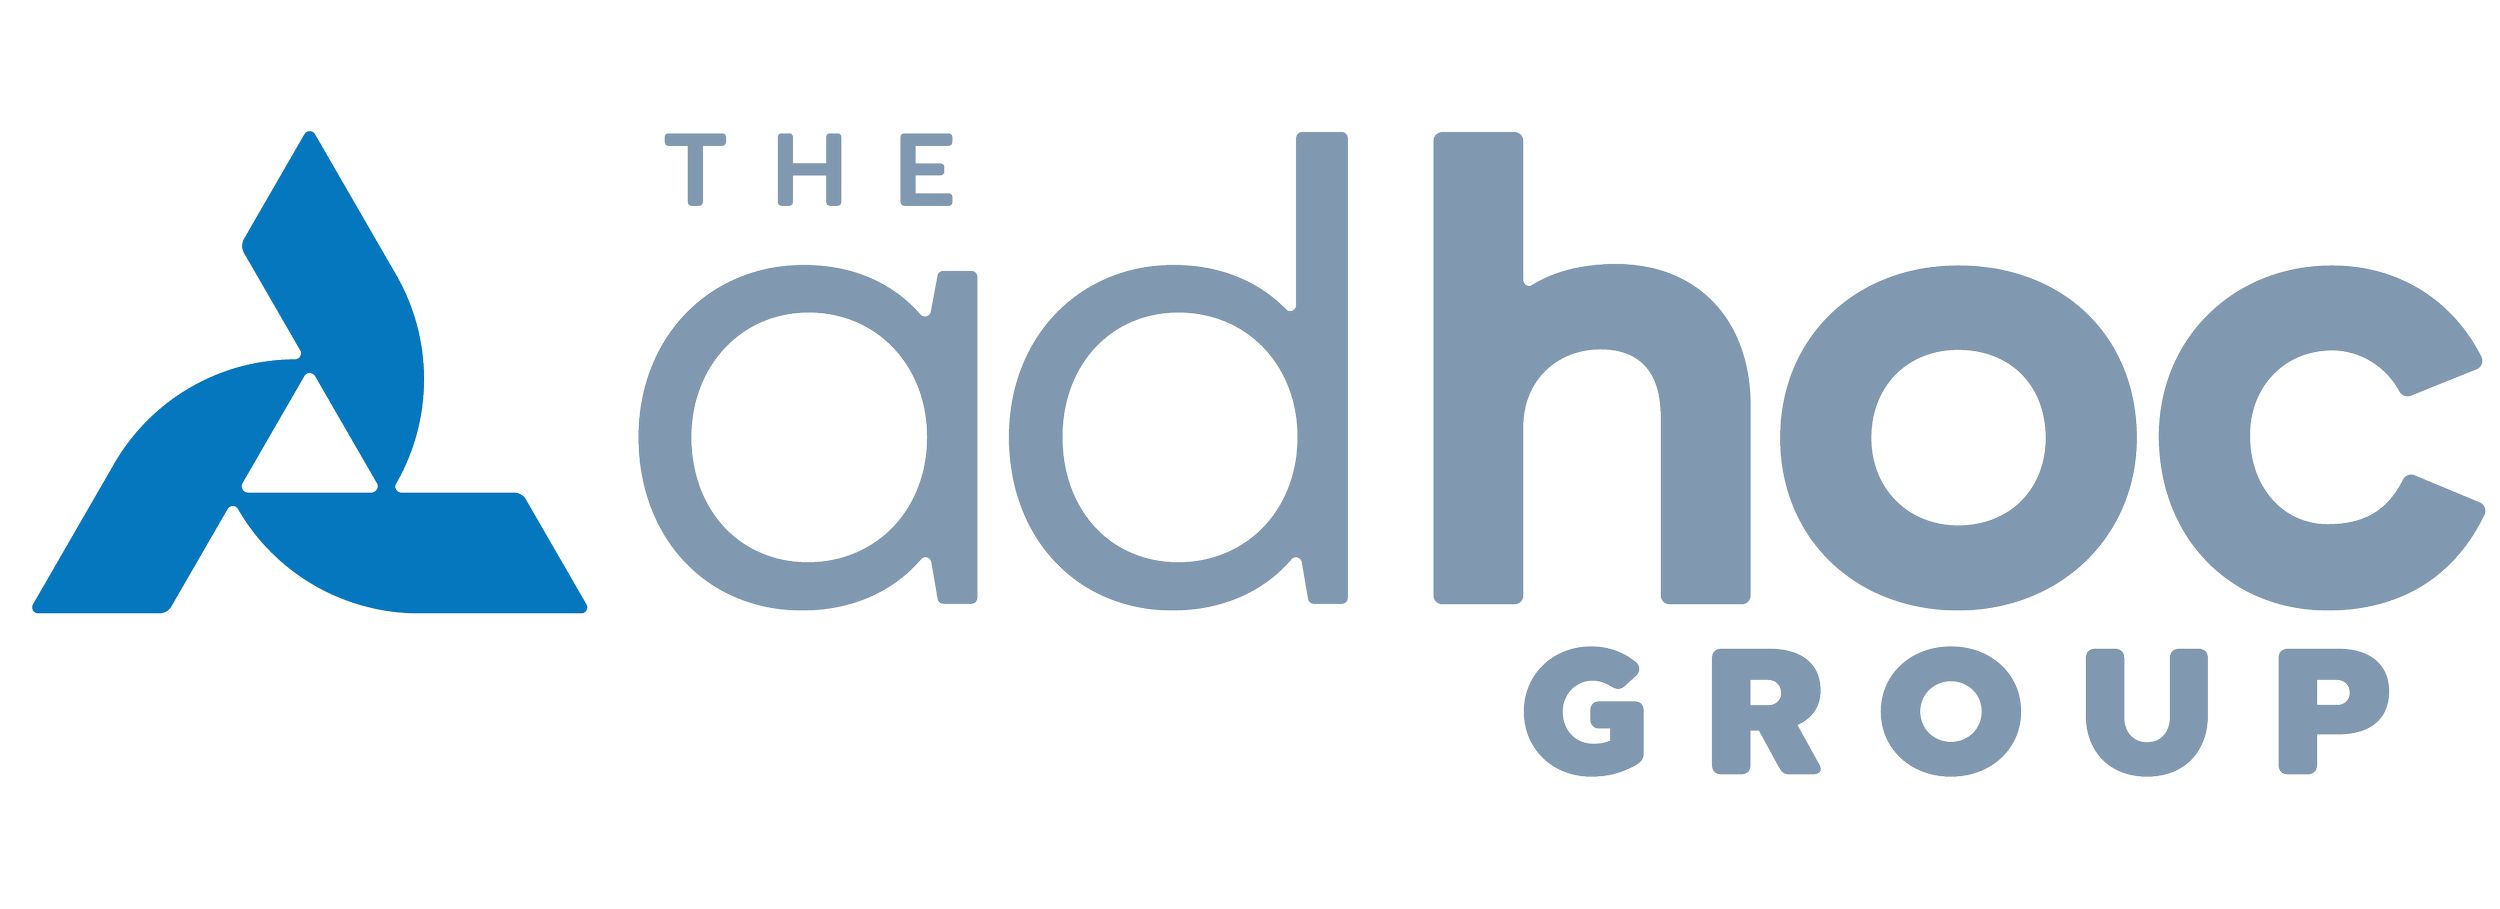 The Adhoc Group - Logo.png